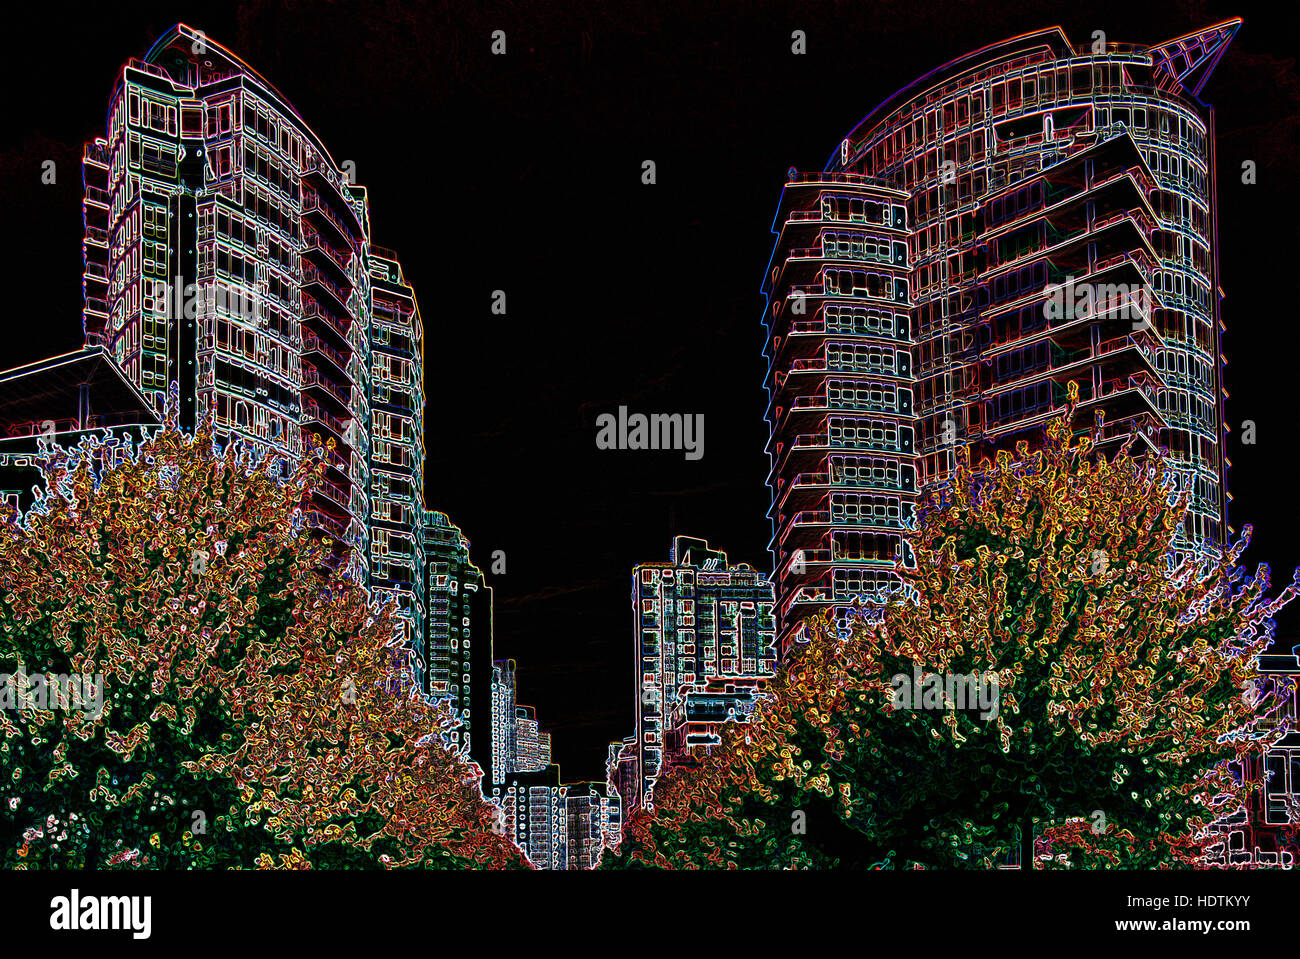 Highrise Buildings - Digitally Manipulated Image with Glowing Edges, Abstract Cityscape and Architecture on a Black Background Stock Photo